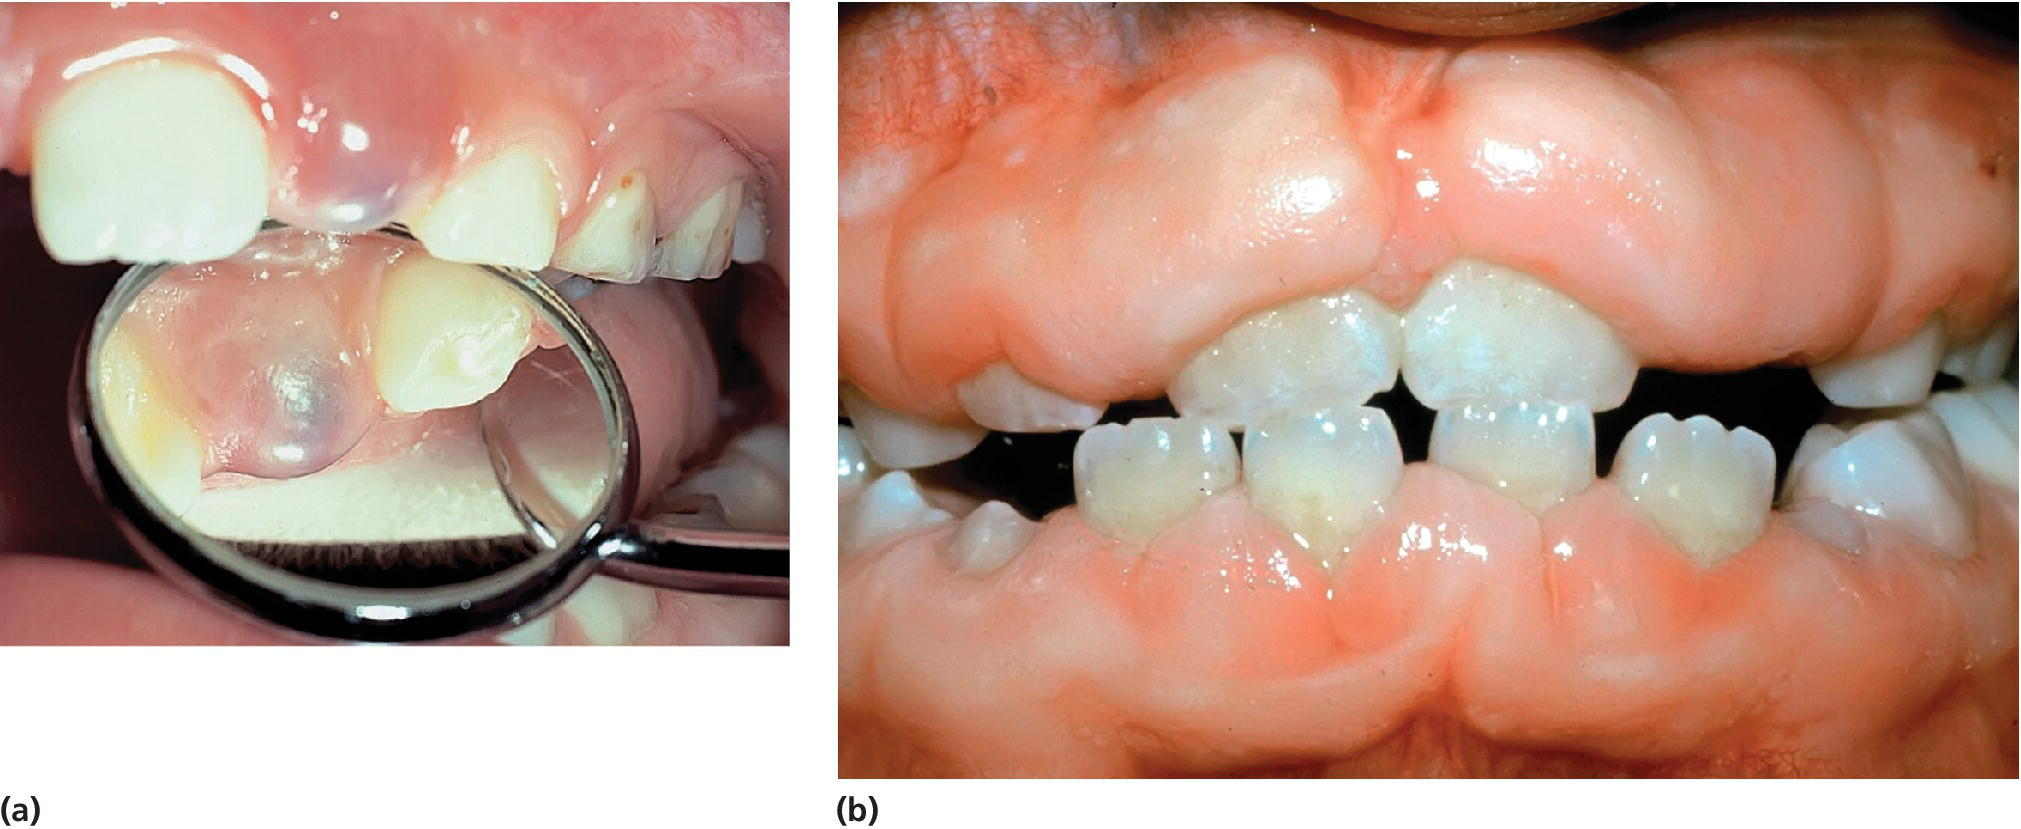 Photos of eruption cyst (a), and gingival overgrowth caused by phenytoin medication influencing tooth eruption (b).